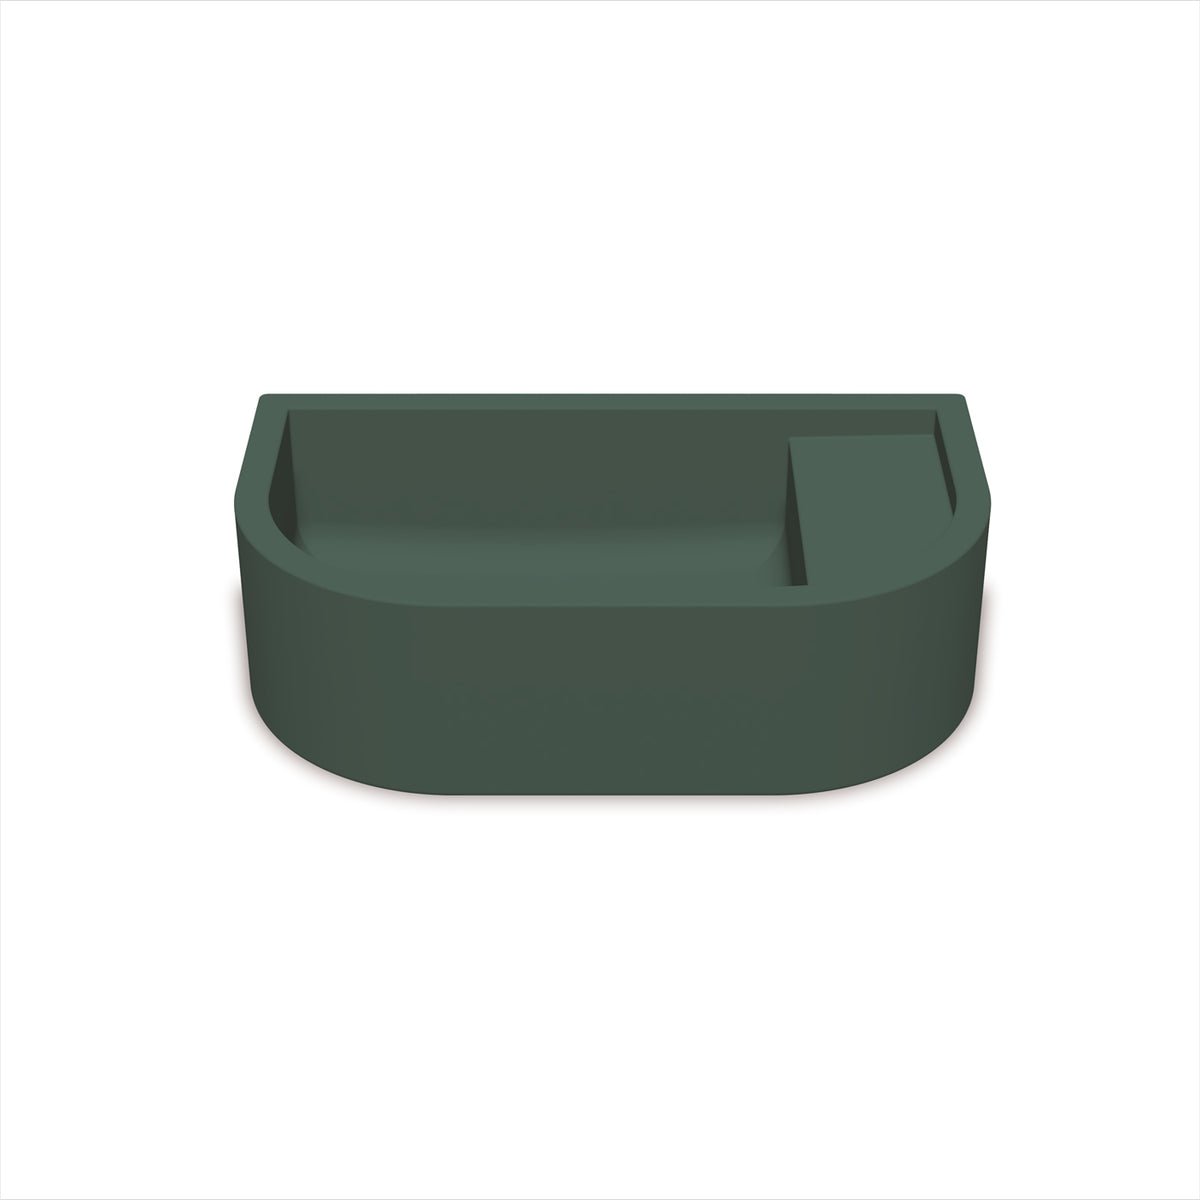 Loop 01 Basin - Overflow - Wall Hung (Teal,No Tap Hole,White)